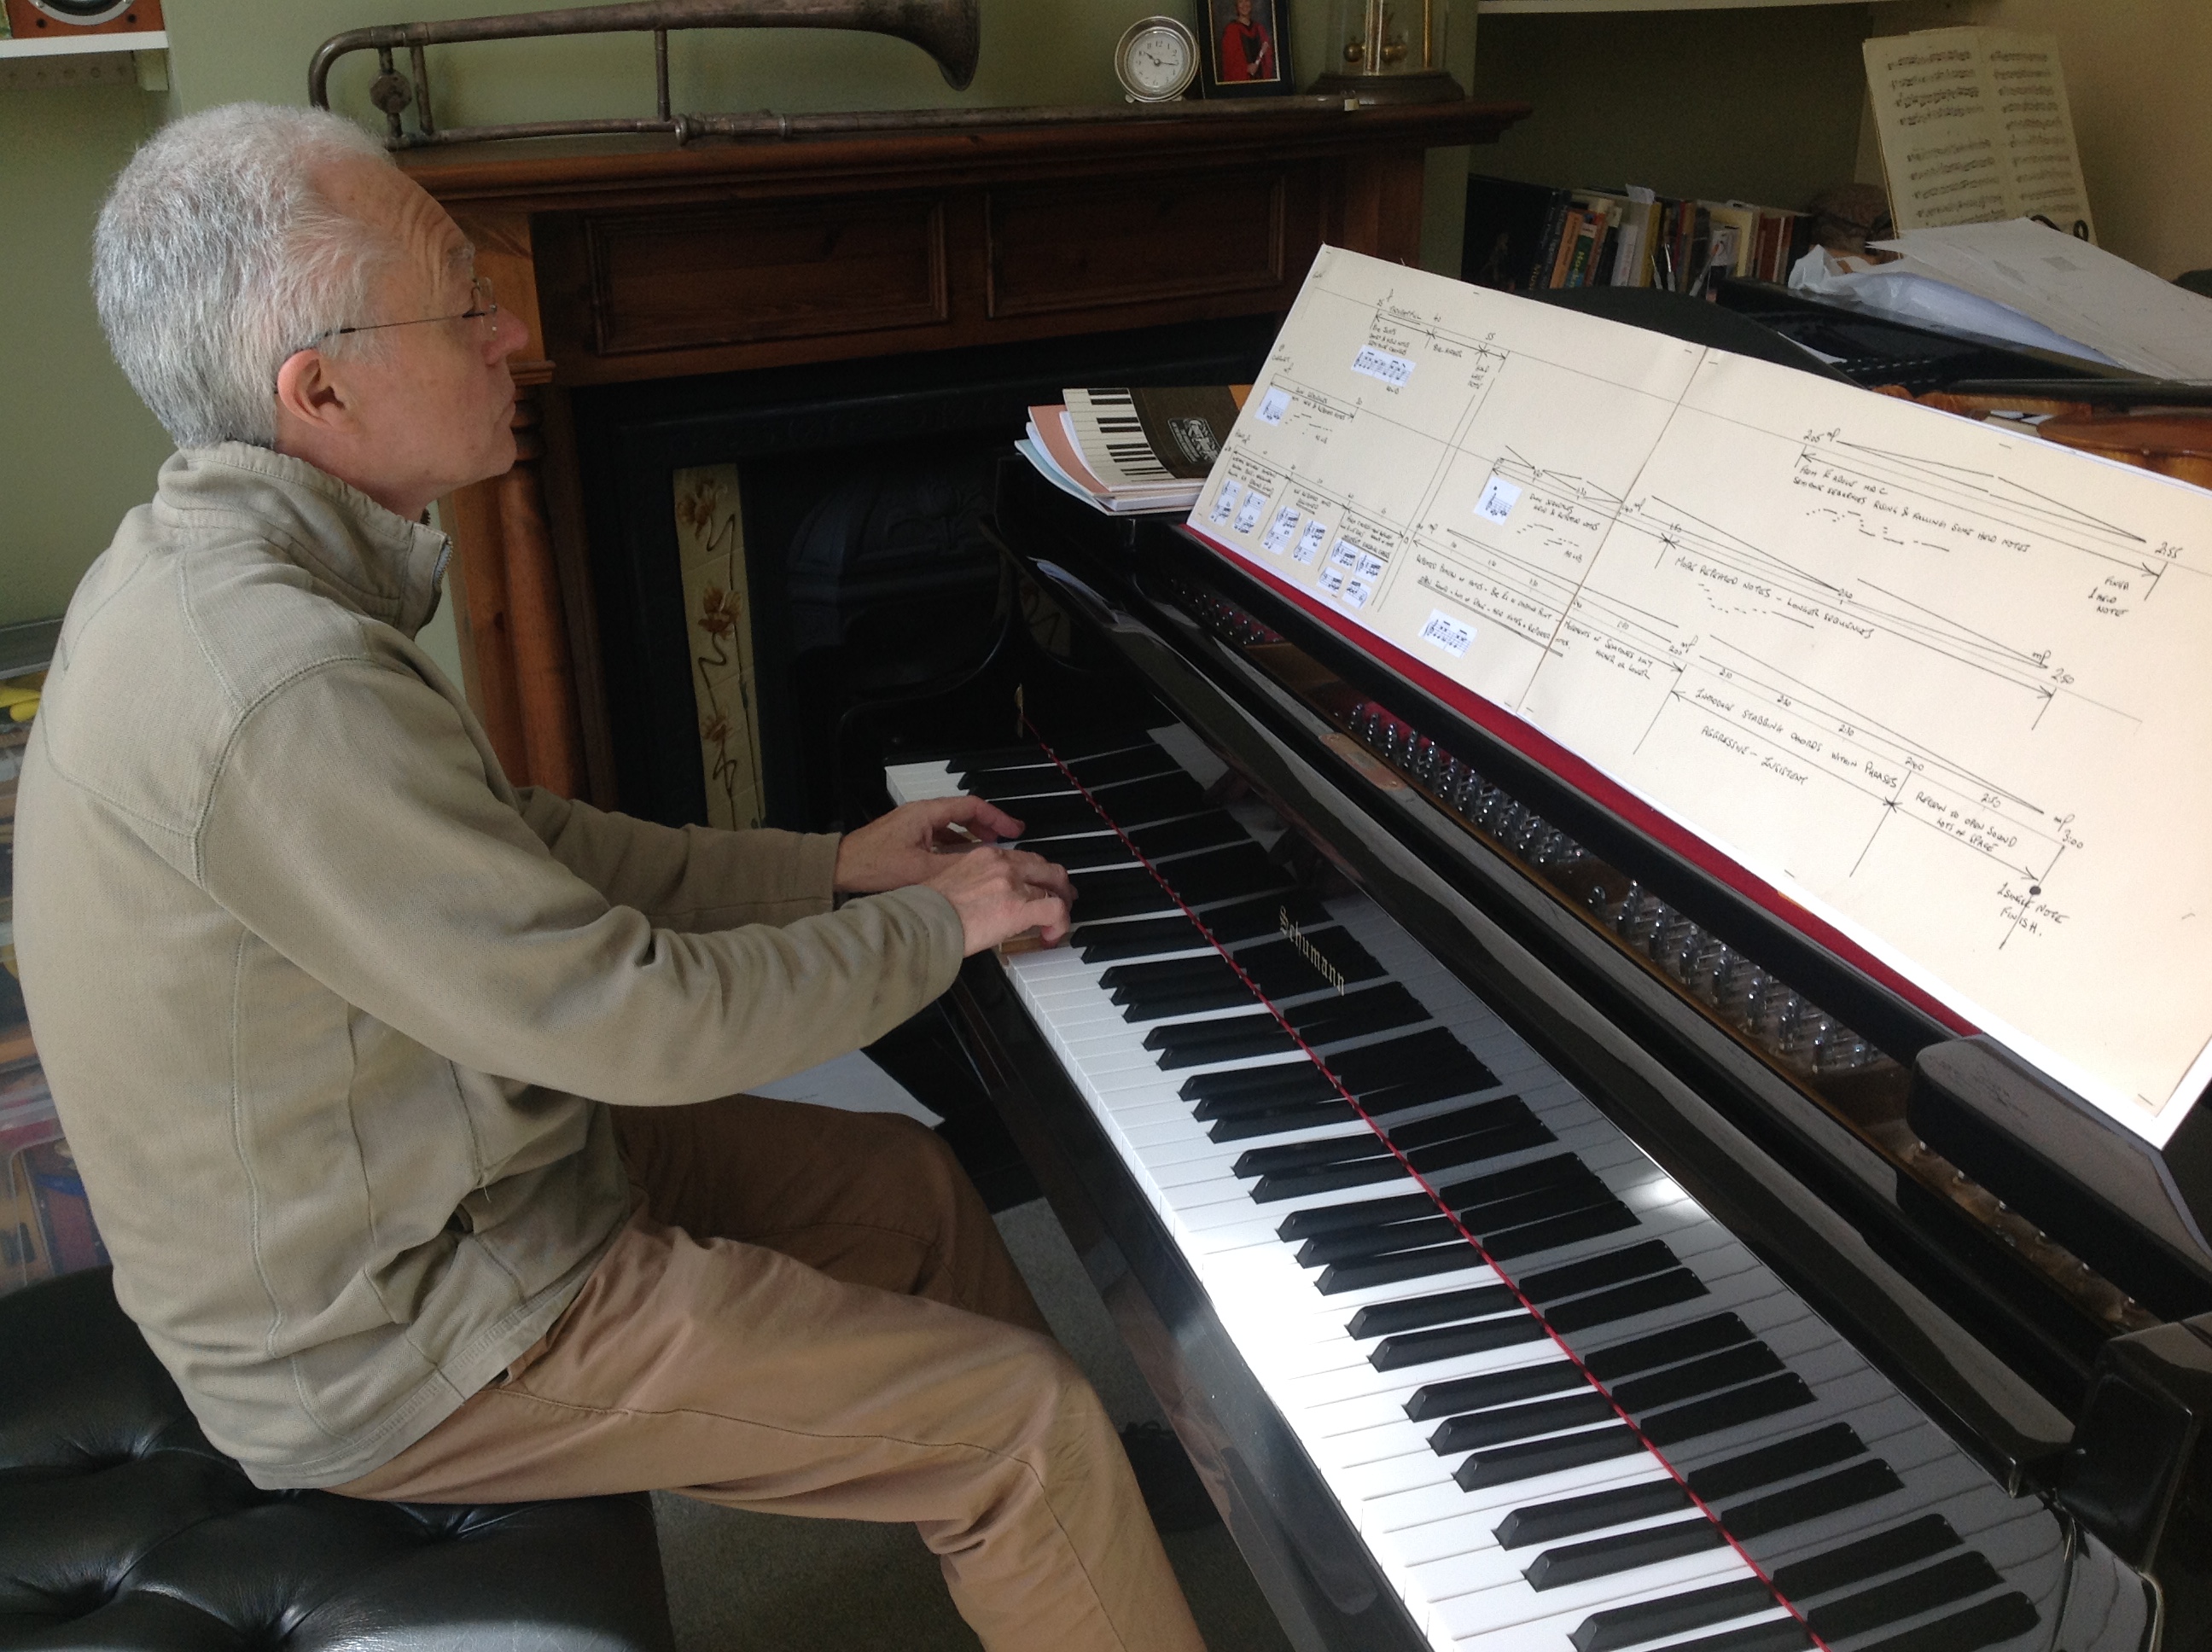 (2016) Peter Smith working on his piece at the piano